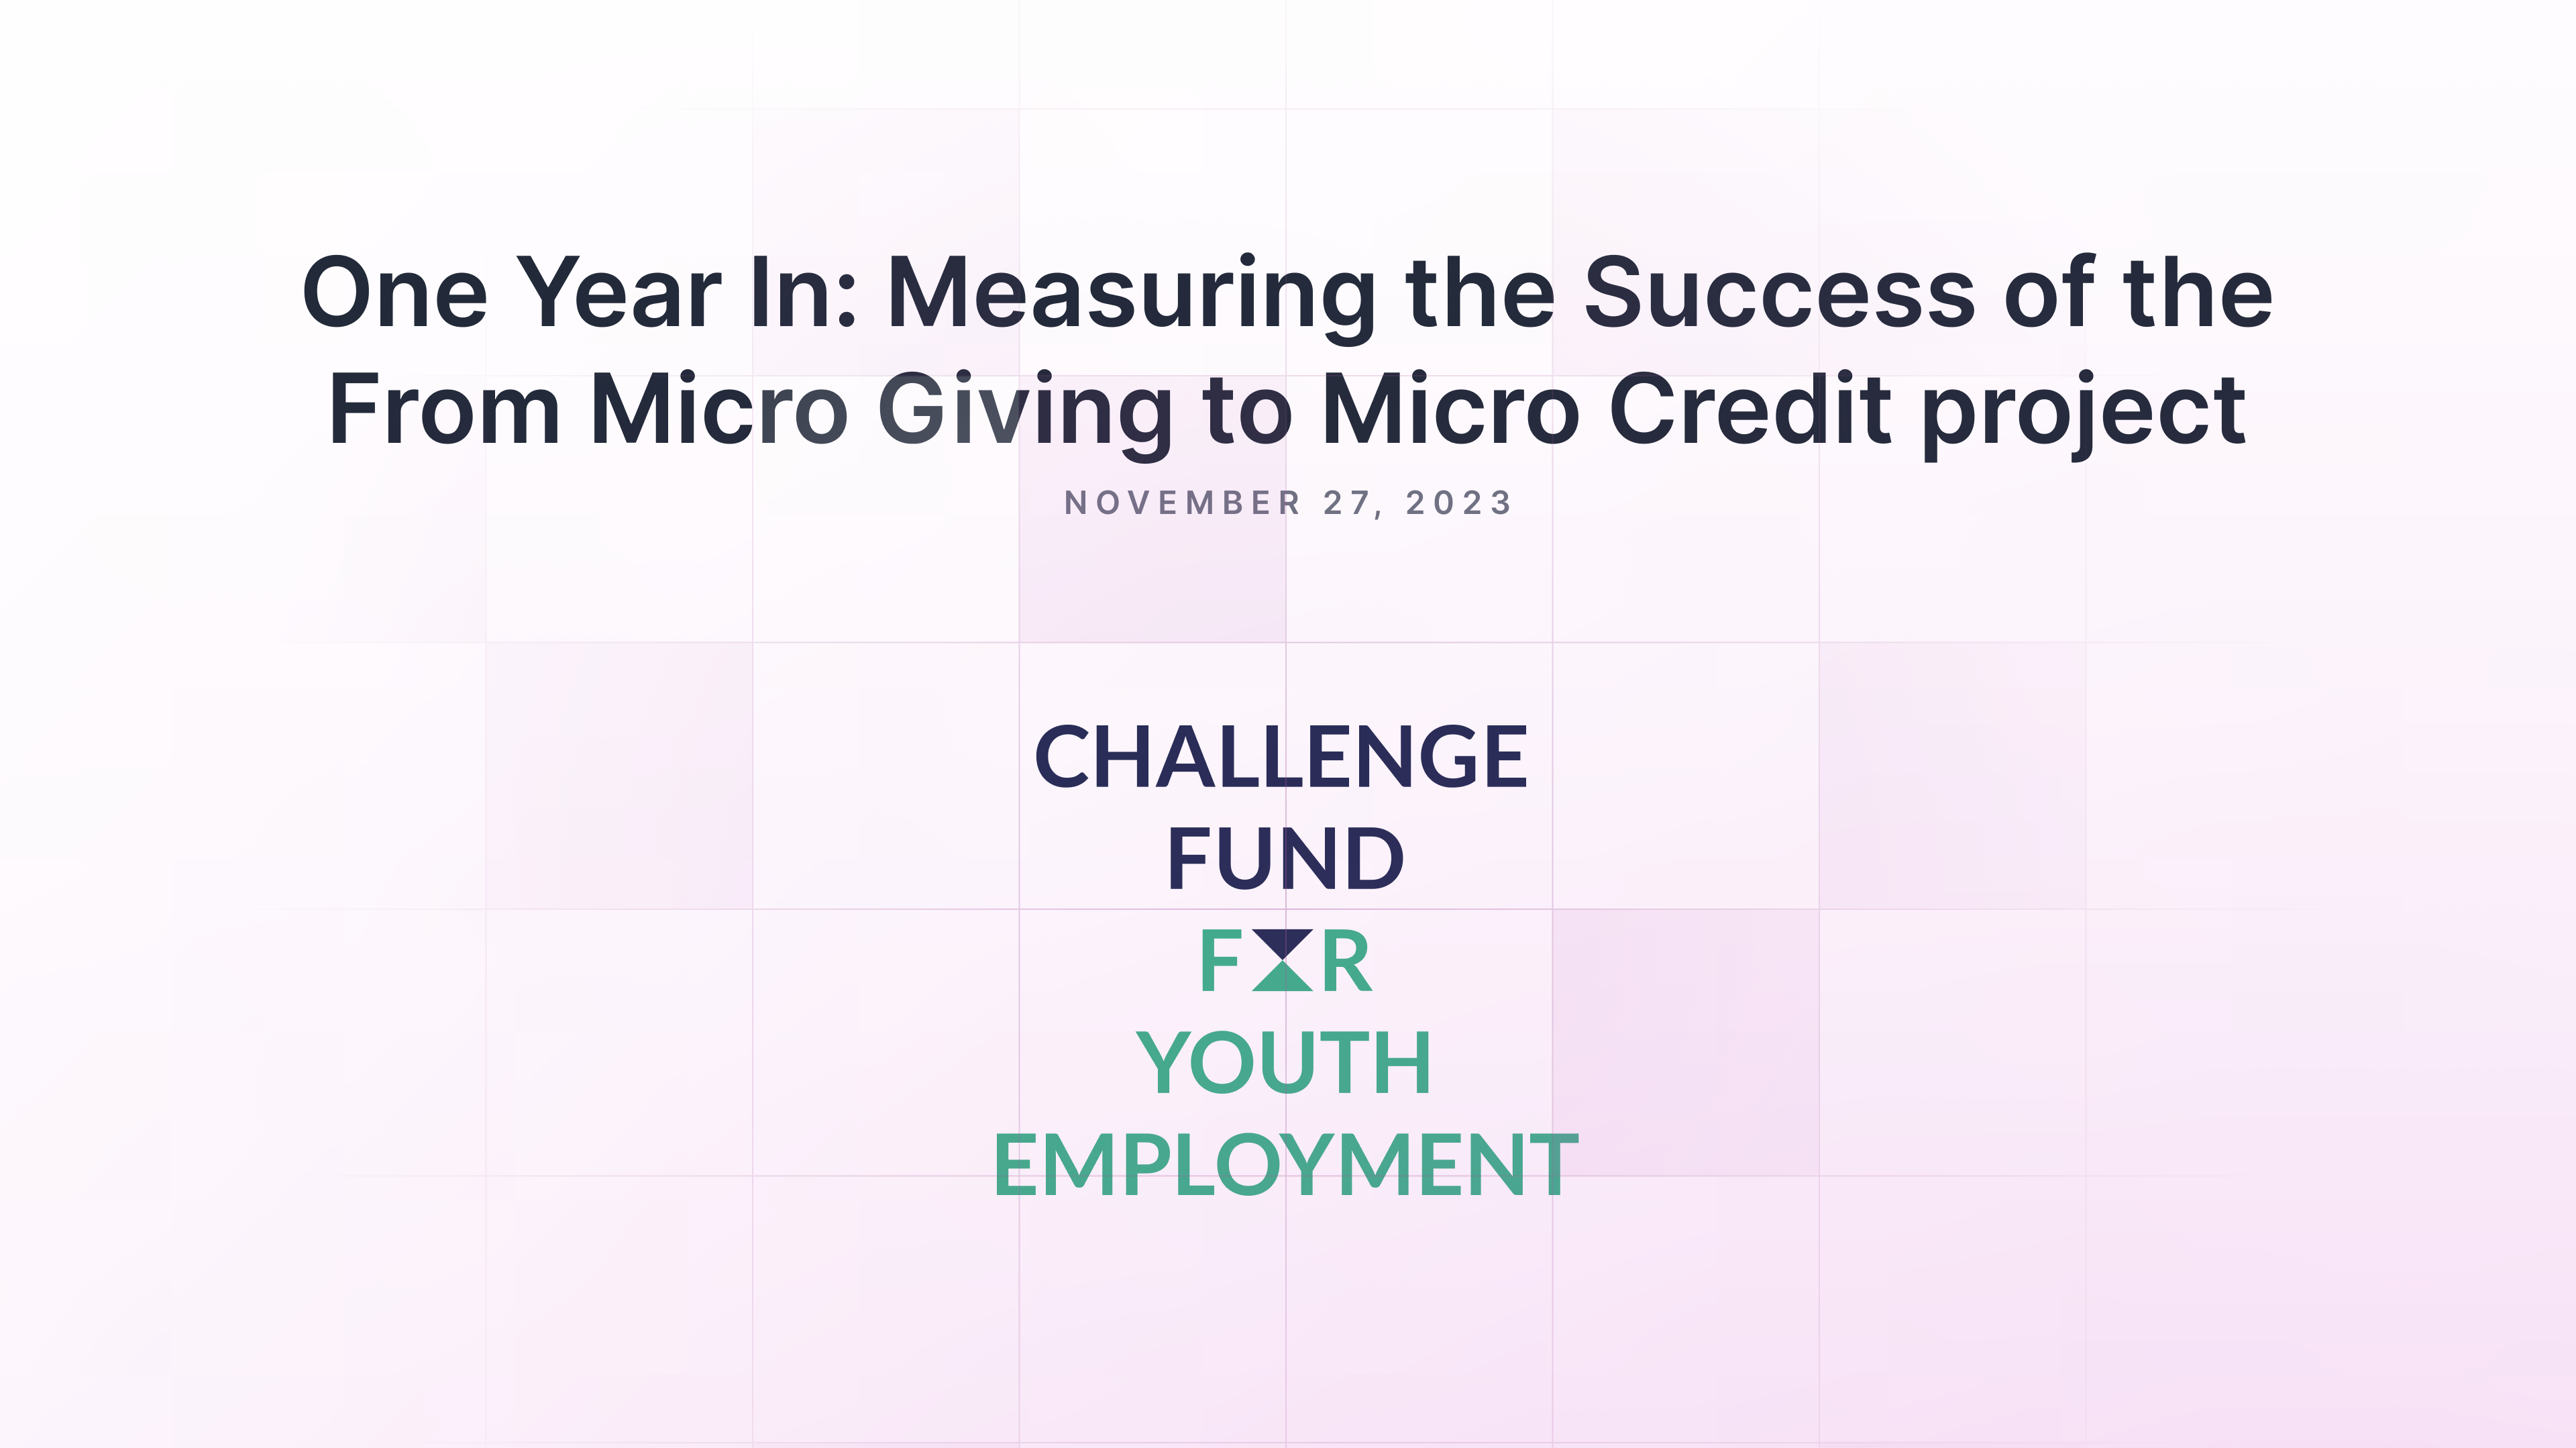 One Year In: Measuring the Success of the From Micro Giving to Micro Credit project